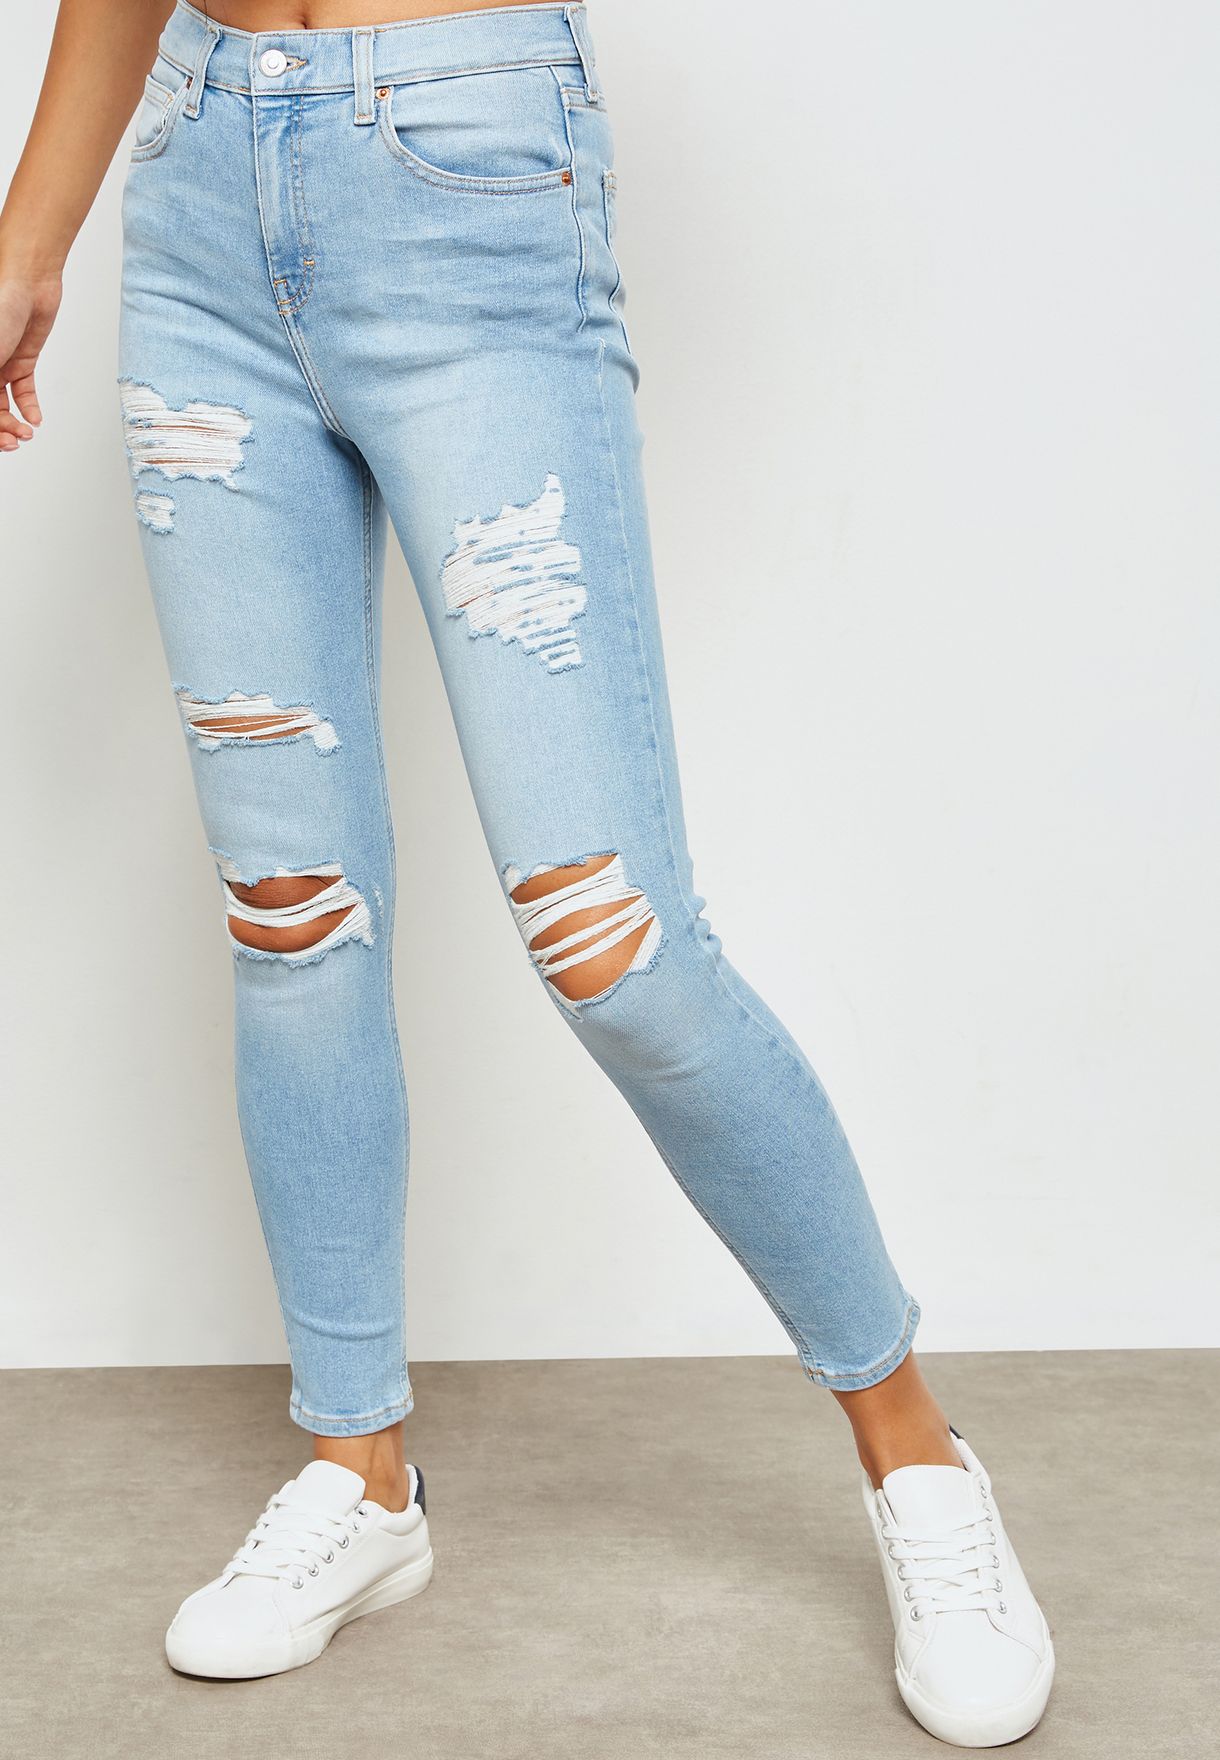 ripped jamie jeans